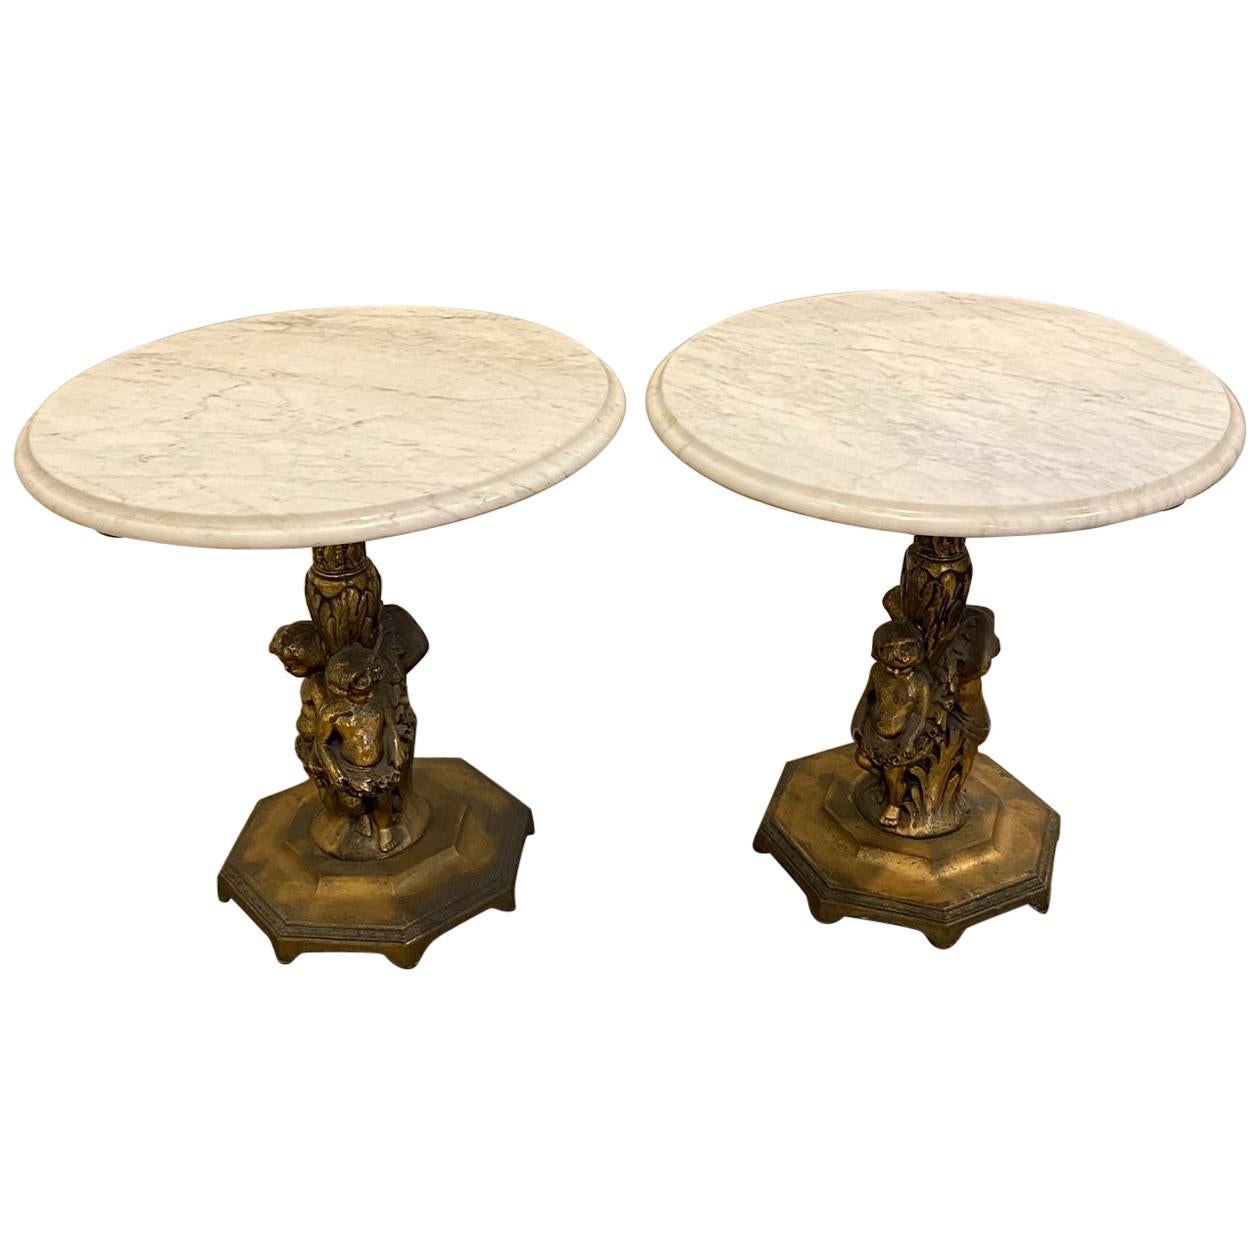 Fancy Pair of Italian Rococo Figural Marble-Top Side Tables